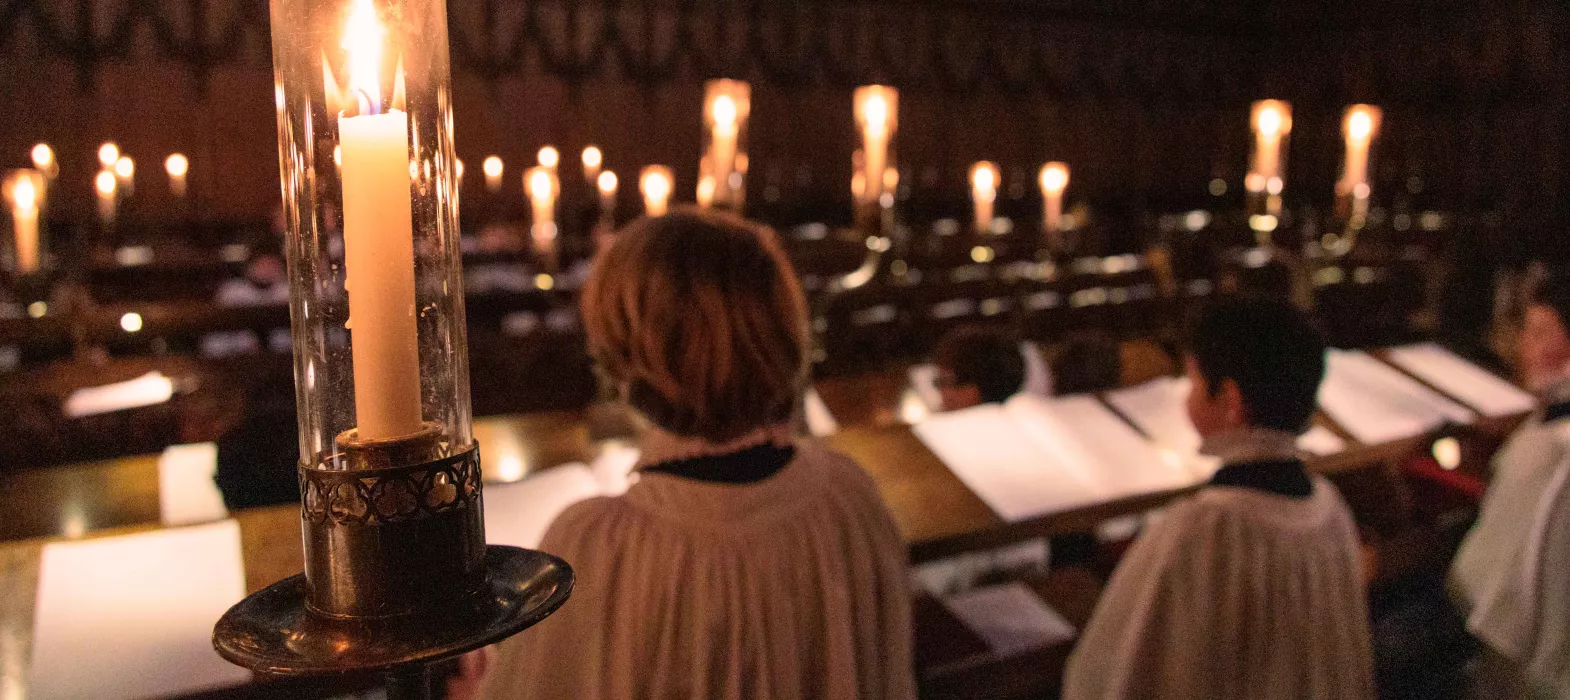 Candles and choristers